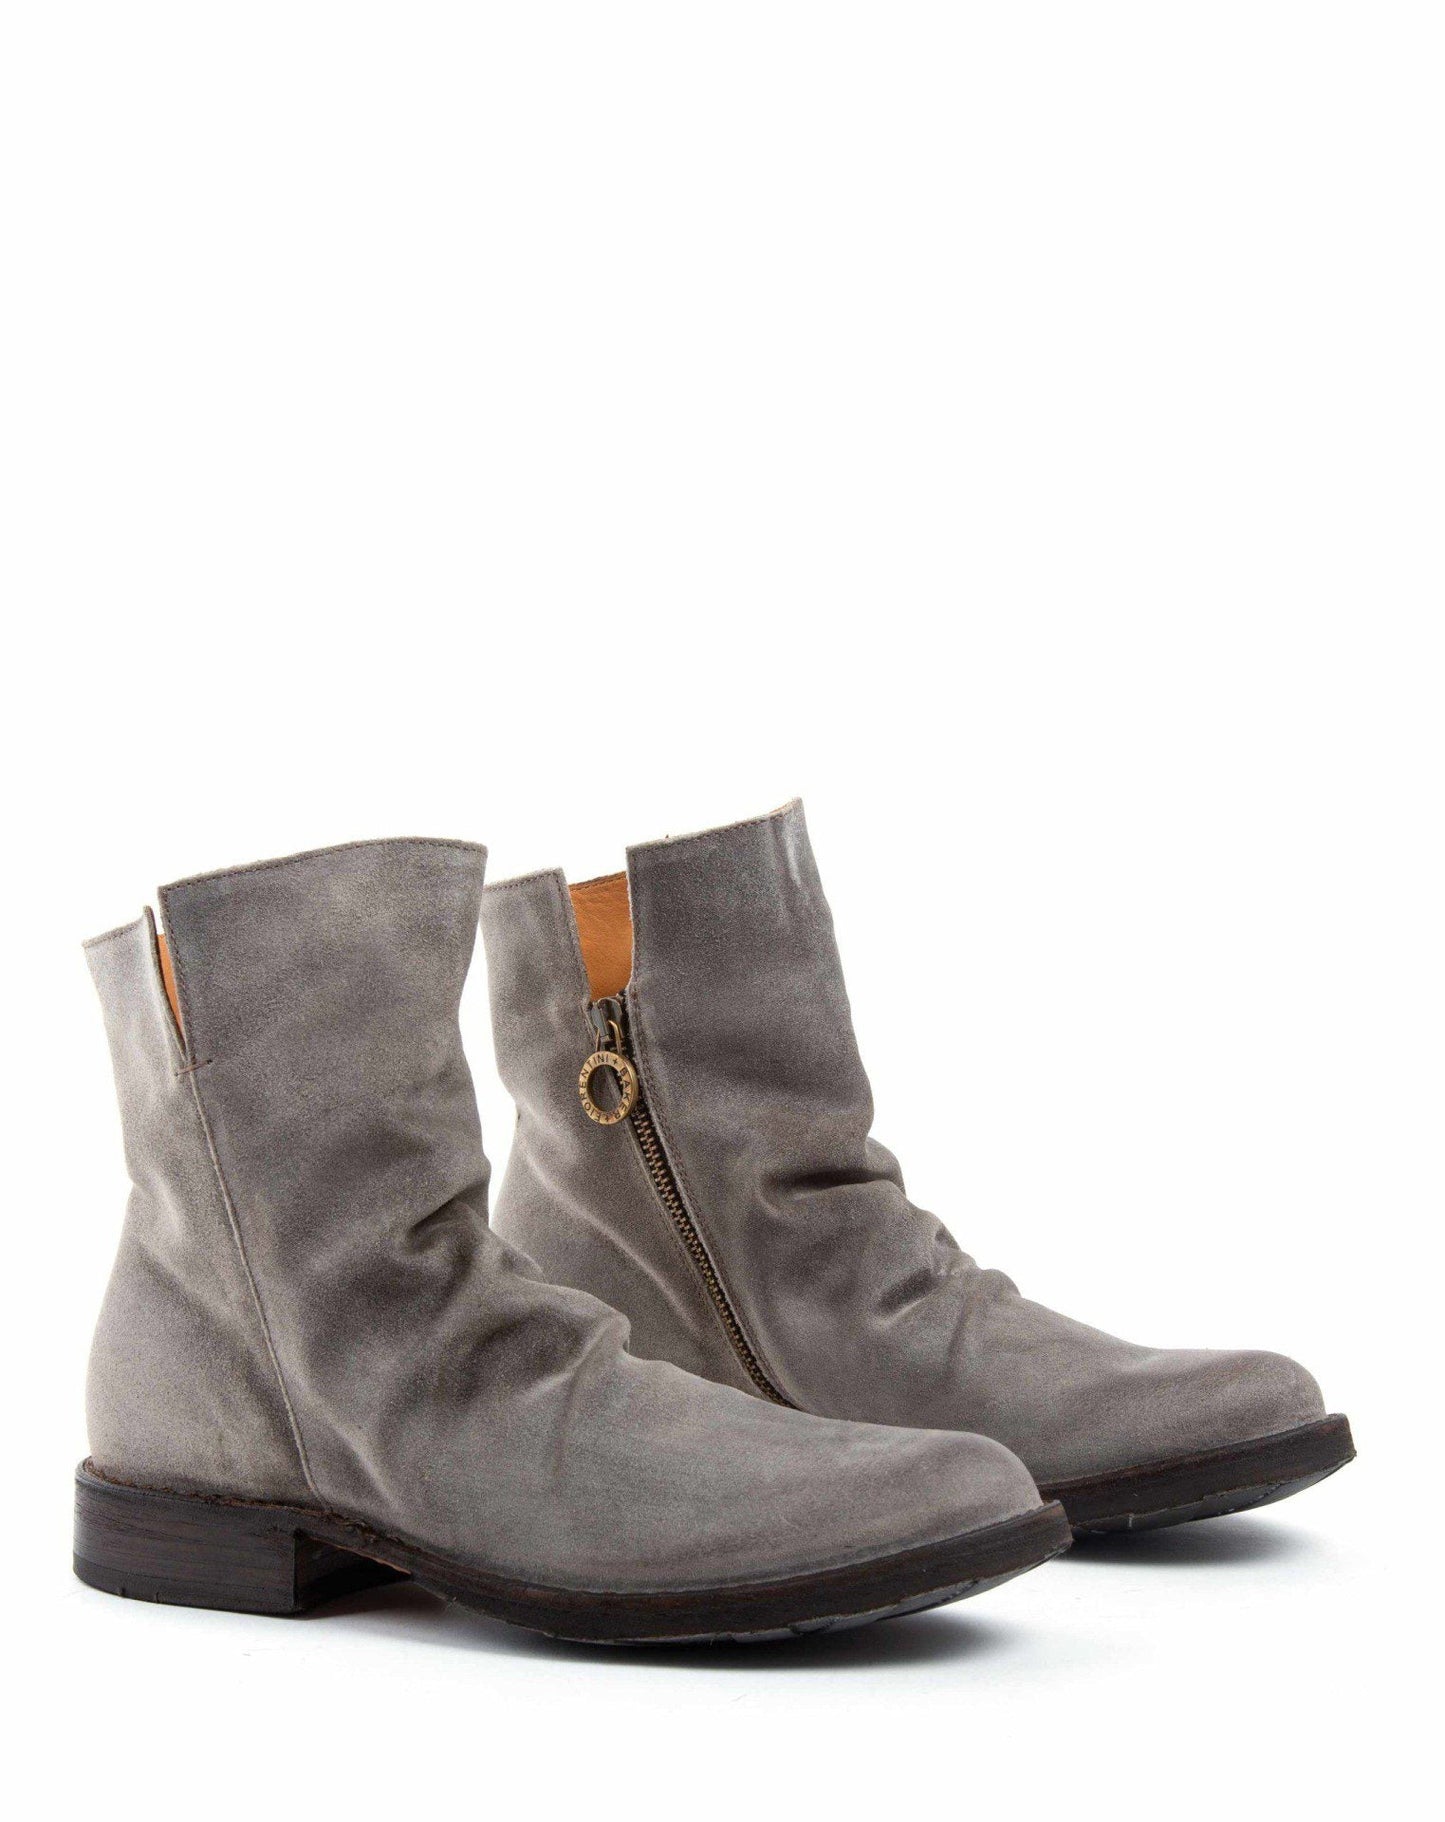 Fiorentini+Baker, ETERNITY ELF, Best-selling iconic boot in the FB collection since 2003. Handcrafted with natural leather by skilled artisans. Made in Italy. Made to last.